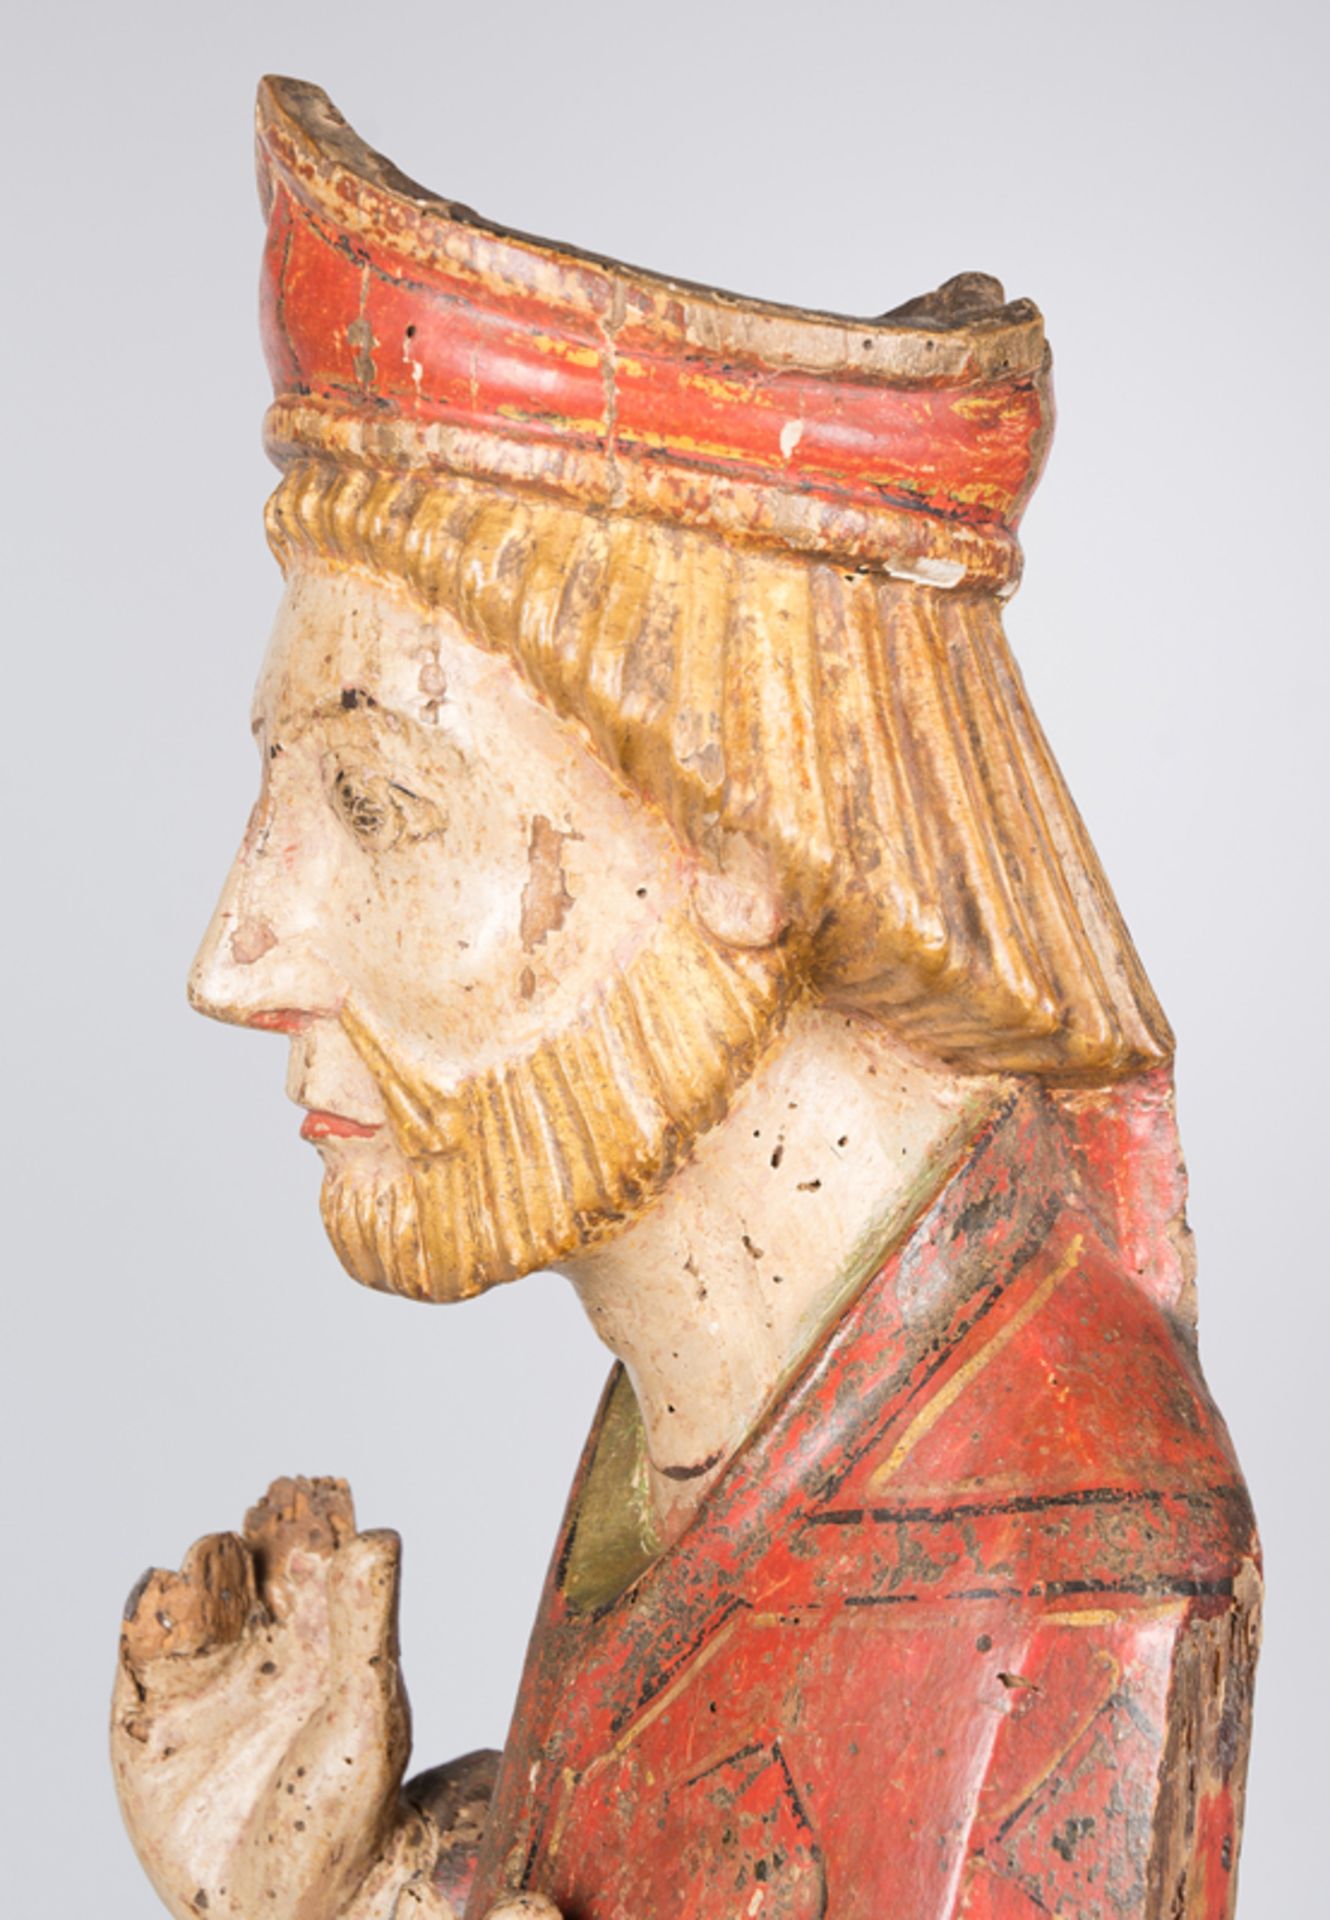 “Saint Augustine". Carved, gilded and polychromed sculpture. Romanesque. CIrca 1300. - Image 7 of 7